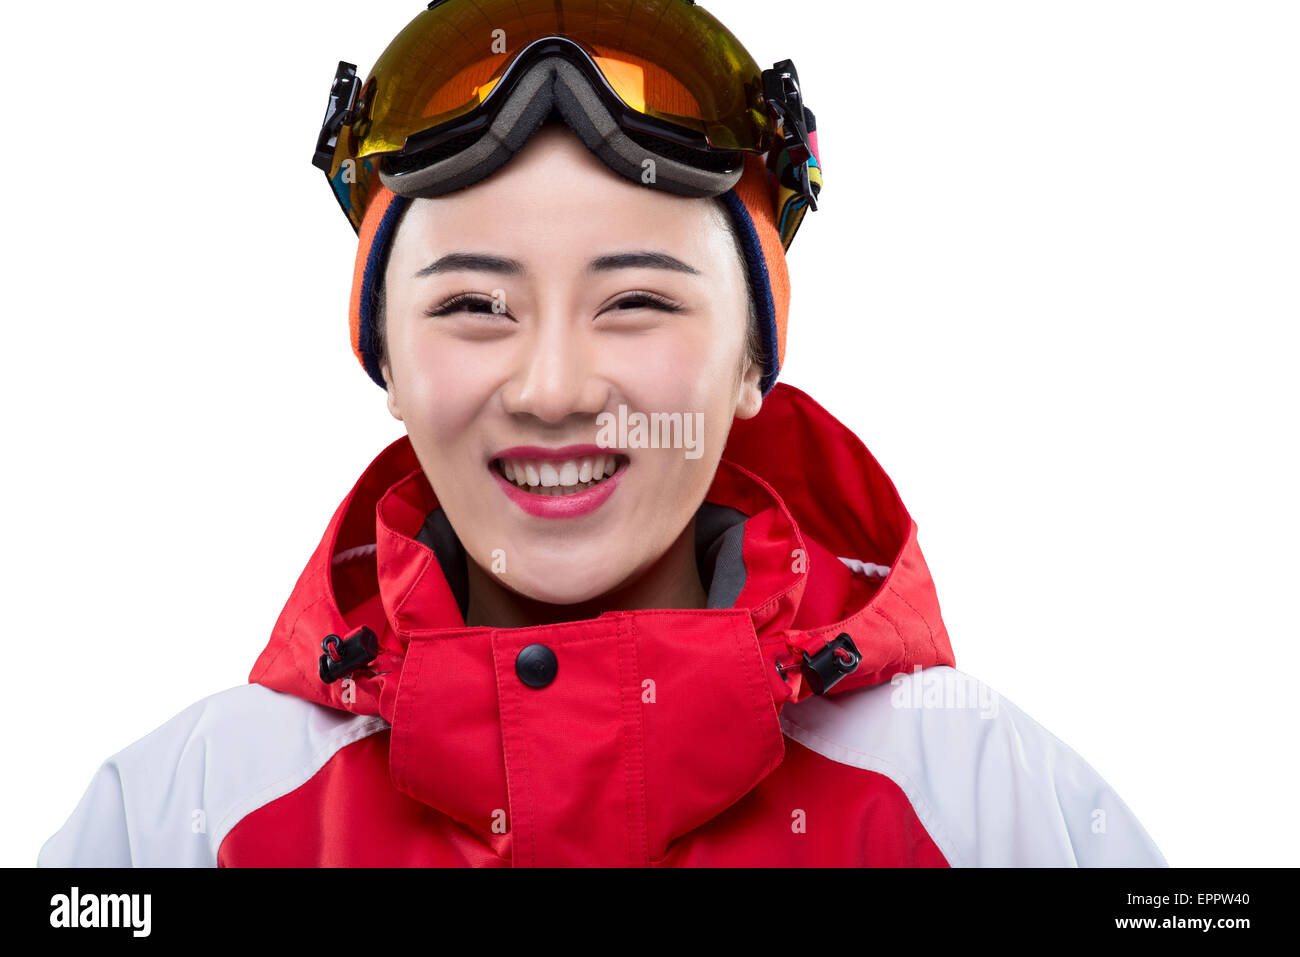 Portrait of young female skier Stock Photo